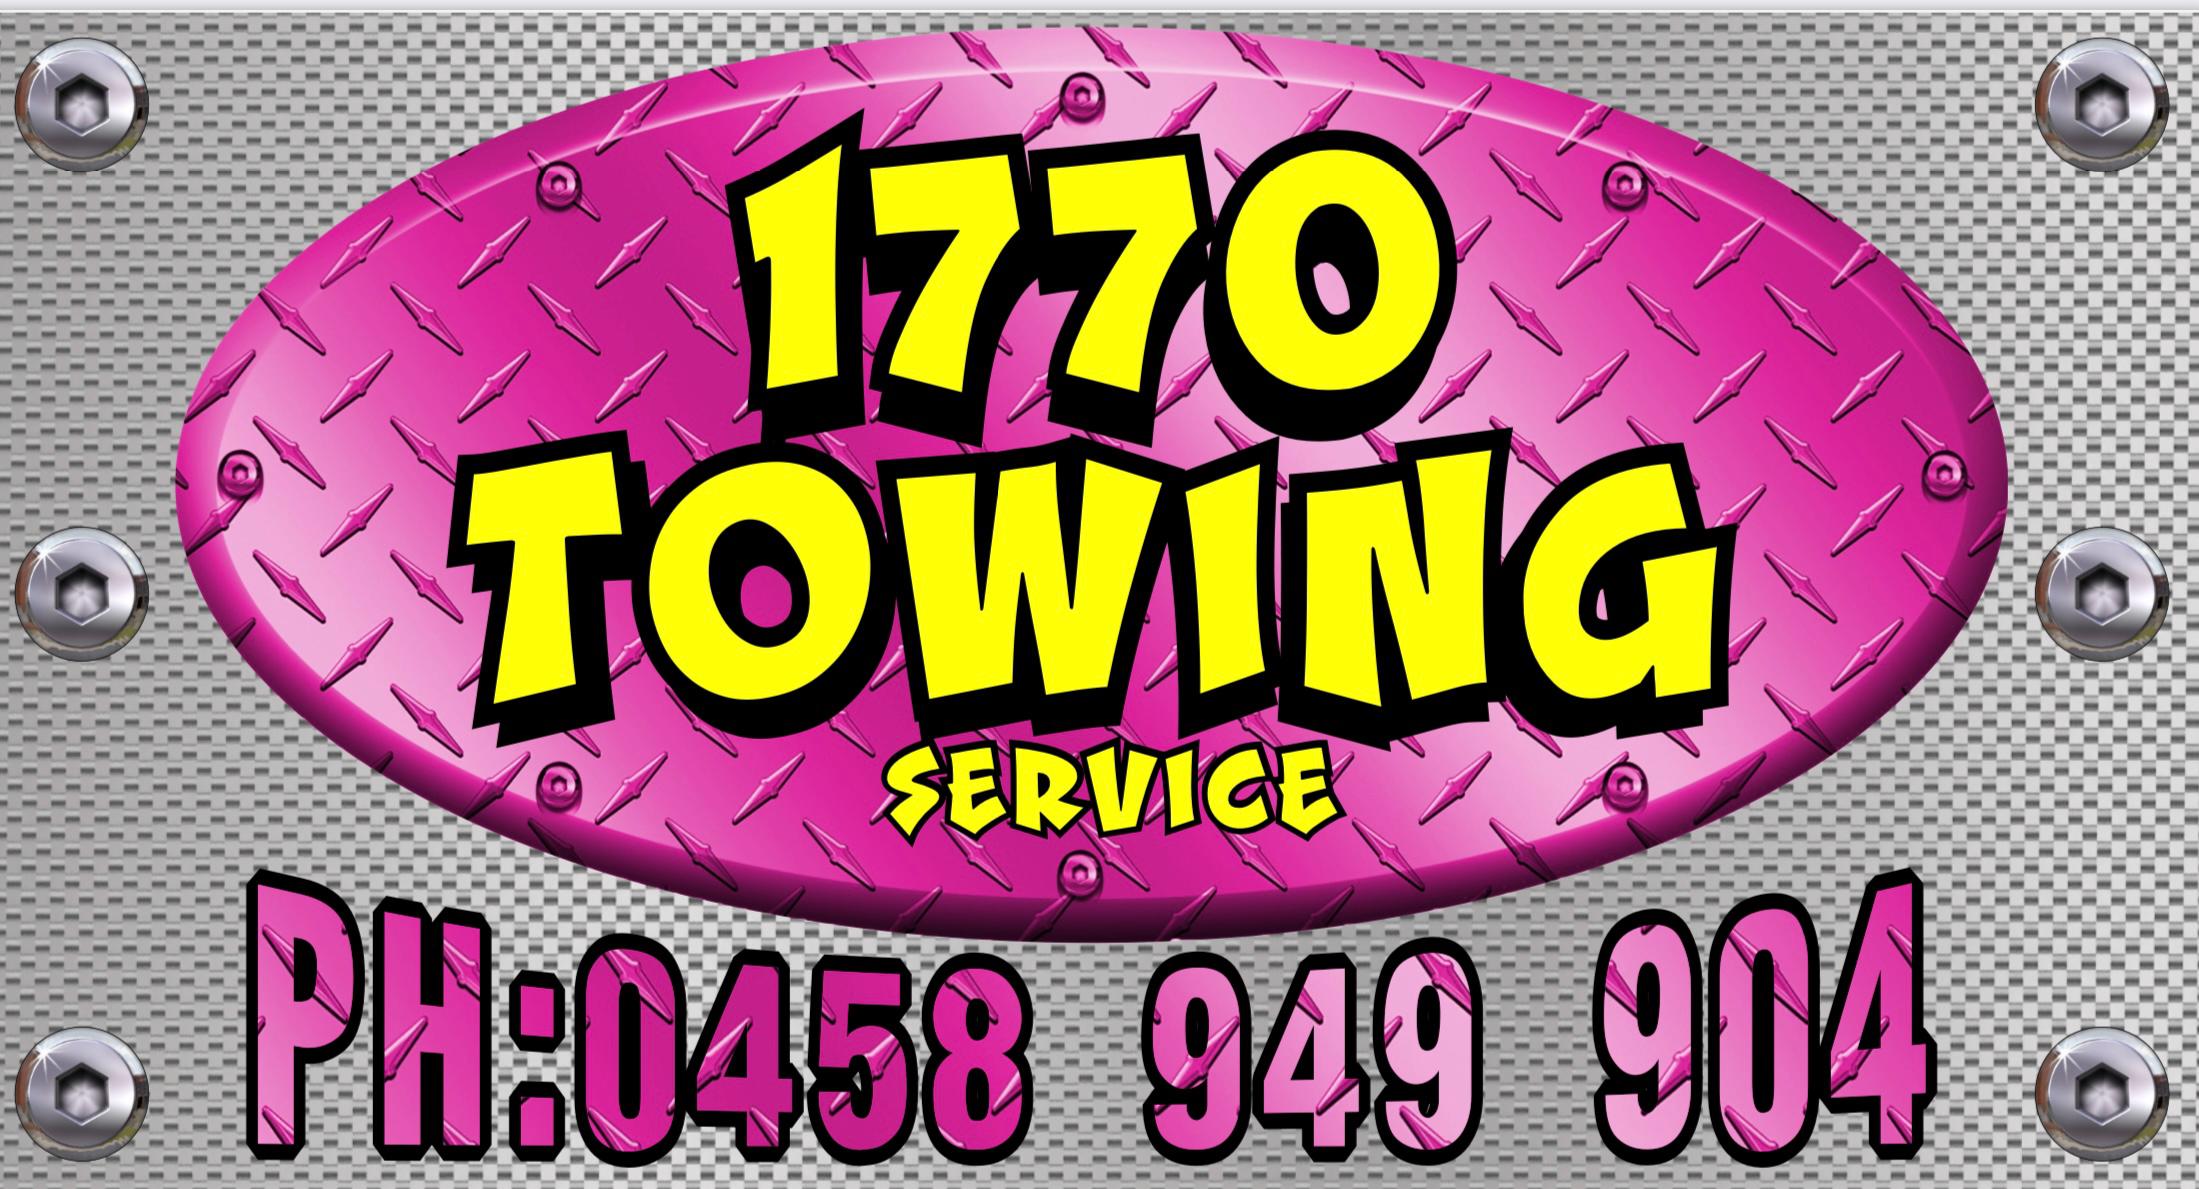 Images The 1770 Towing Service